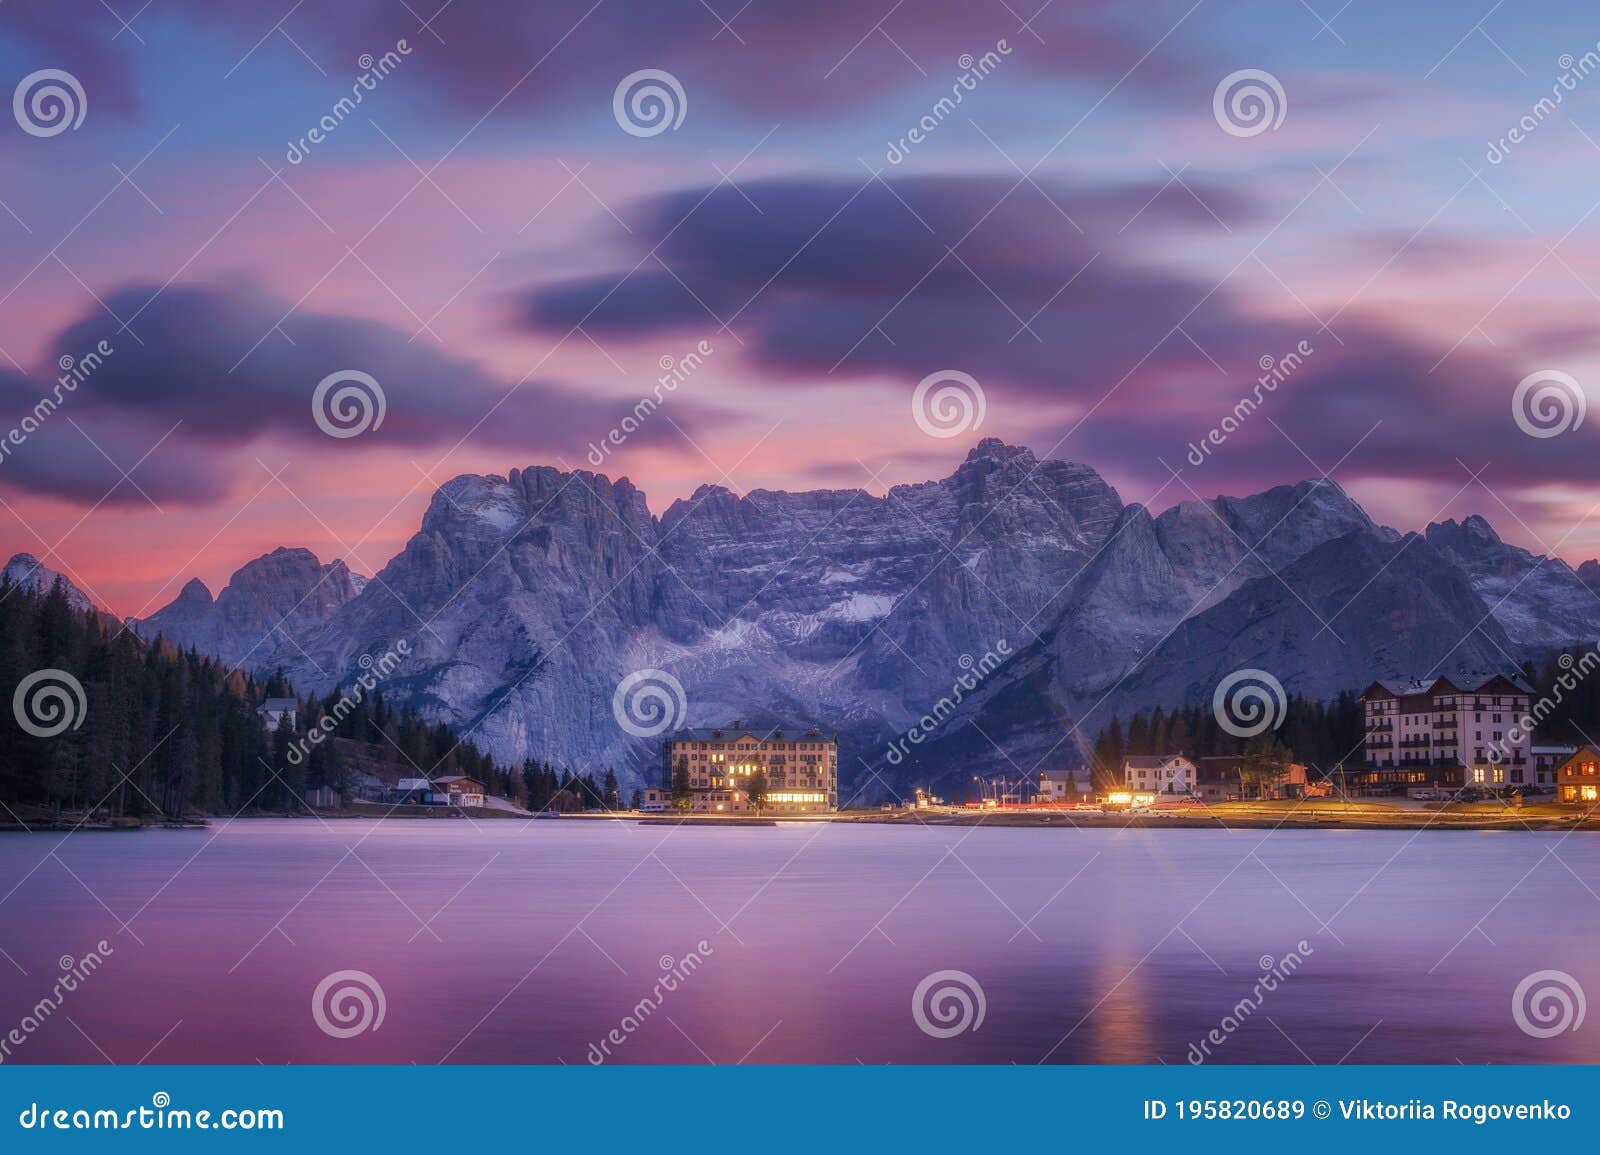 famous tourist place lake lago di misurina on sunset. picture with long e[posure and amazing dramatic sky